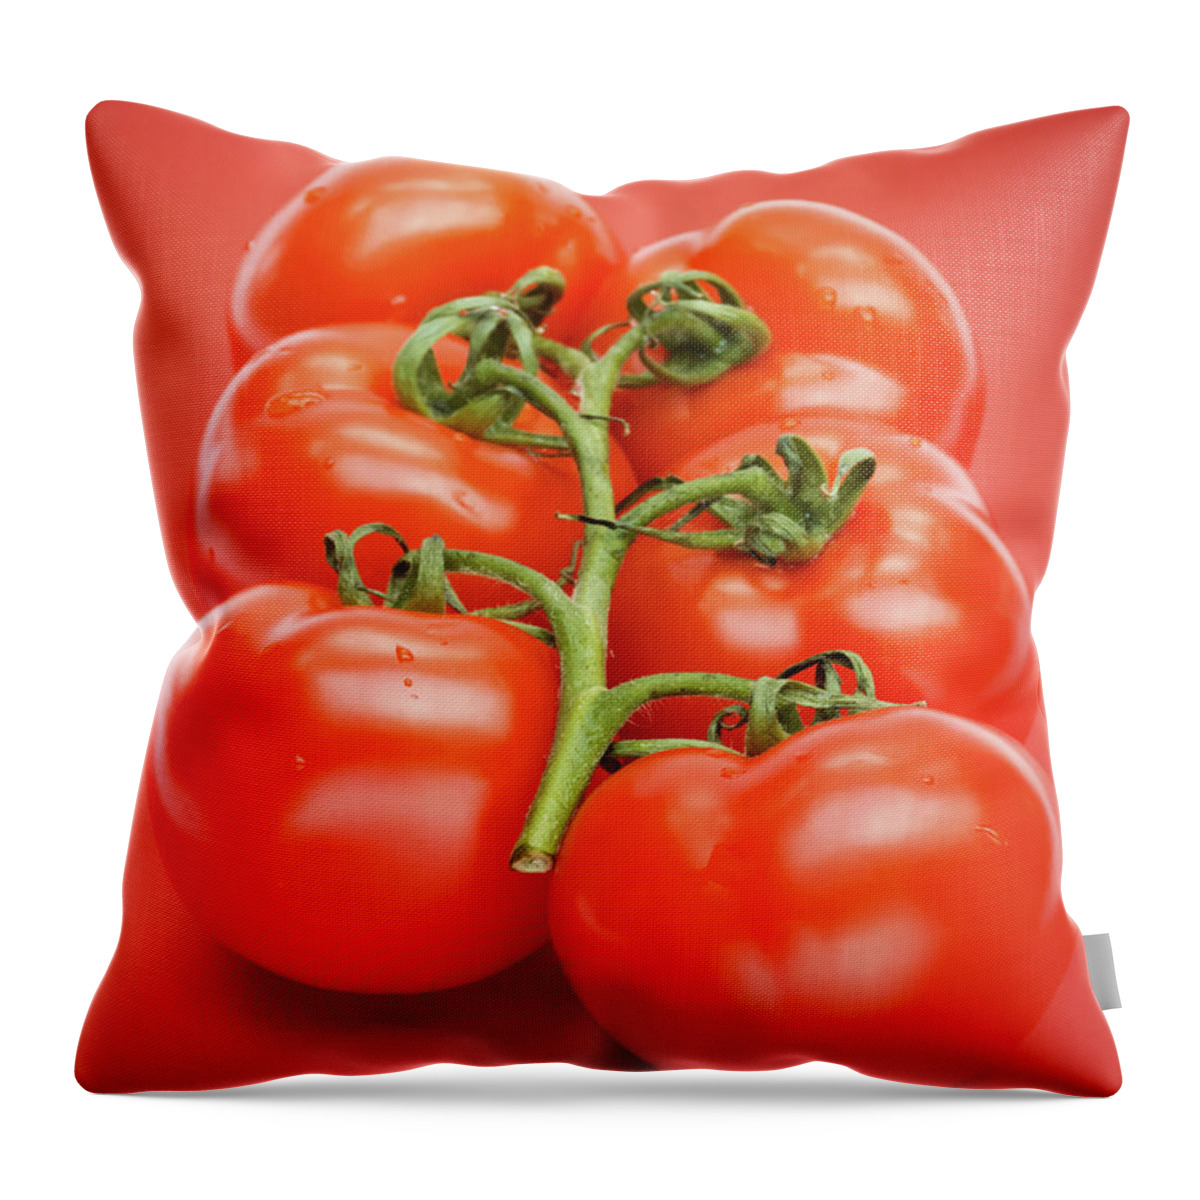 Tomatoes Throw Pillow featuring the photograph Tomatoes by Wim Lanclus